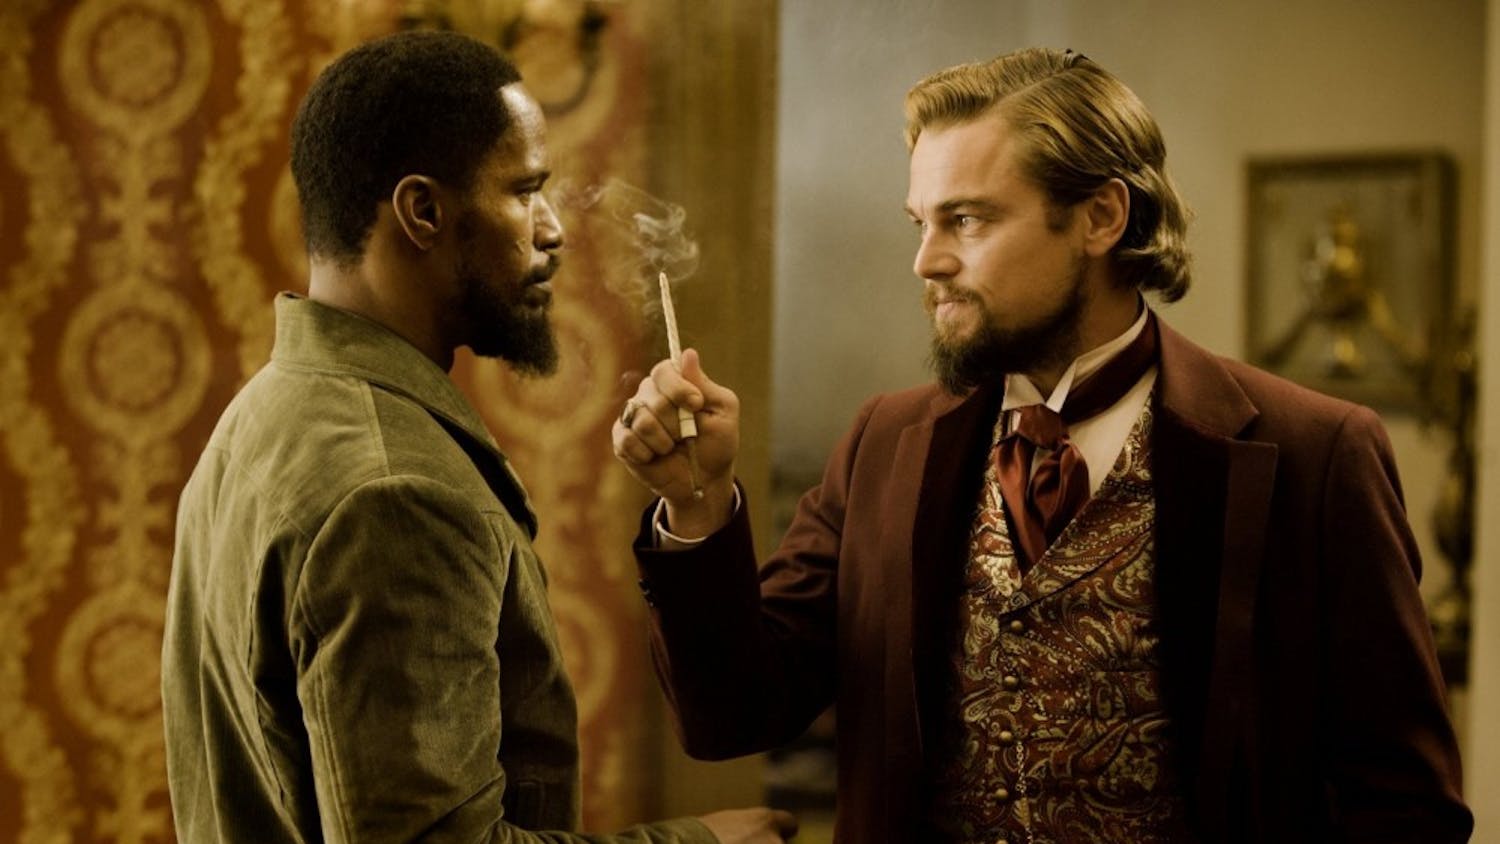 	‘Django Unchained’ gets four out of four stars for a strong cast and story.